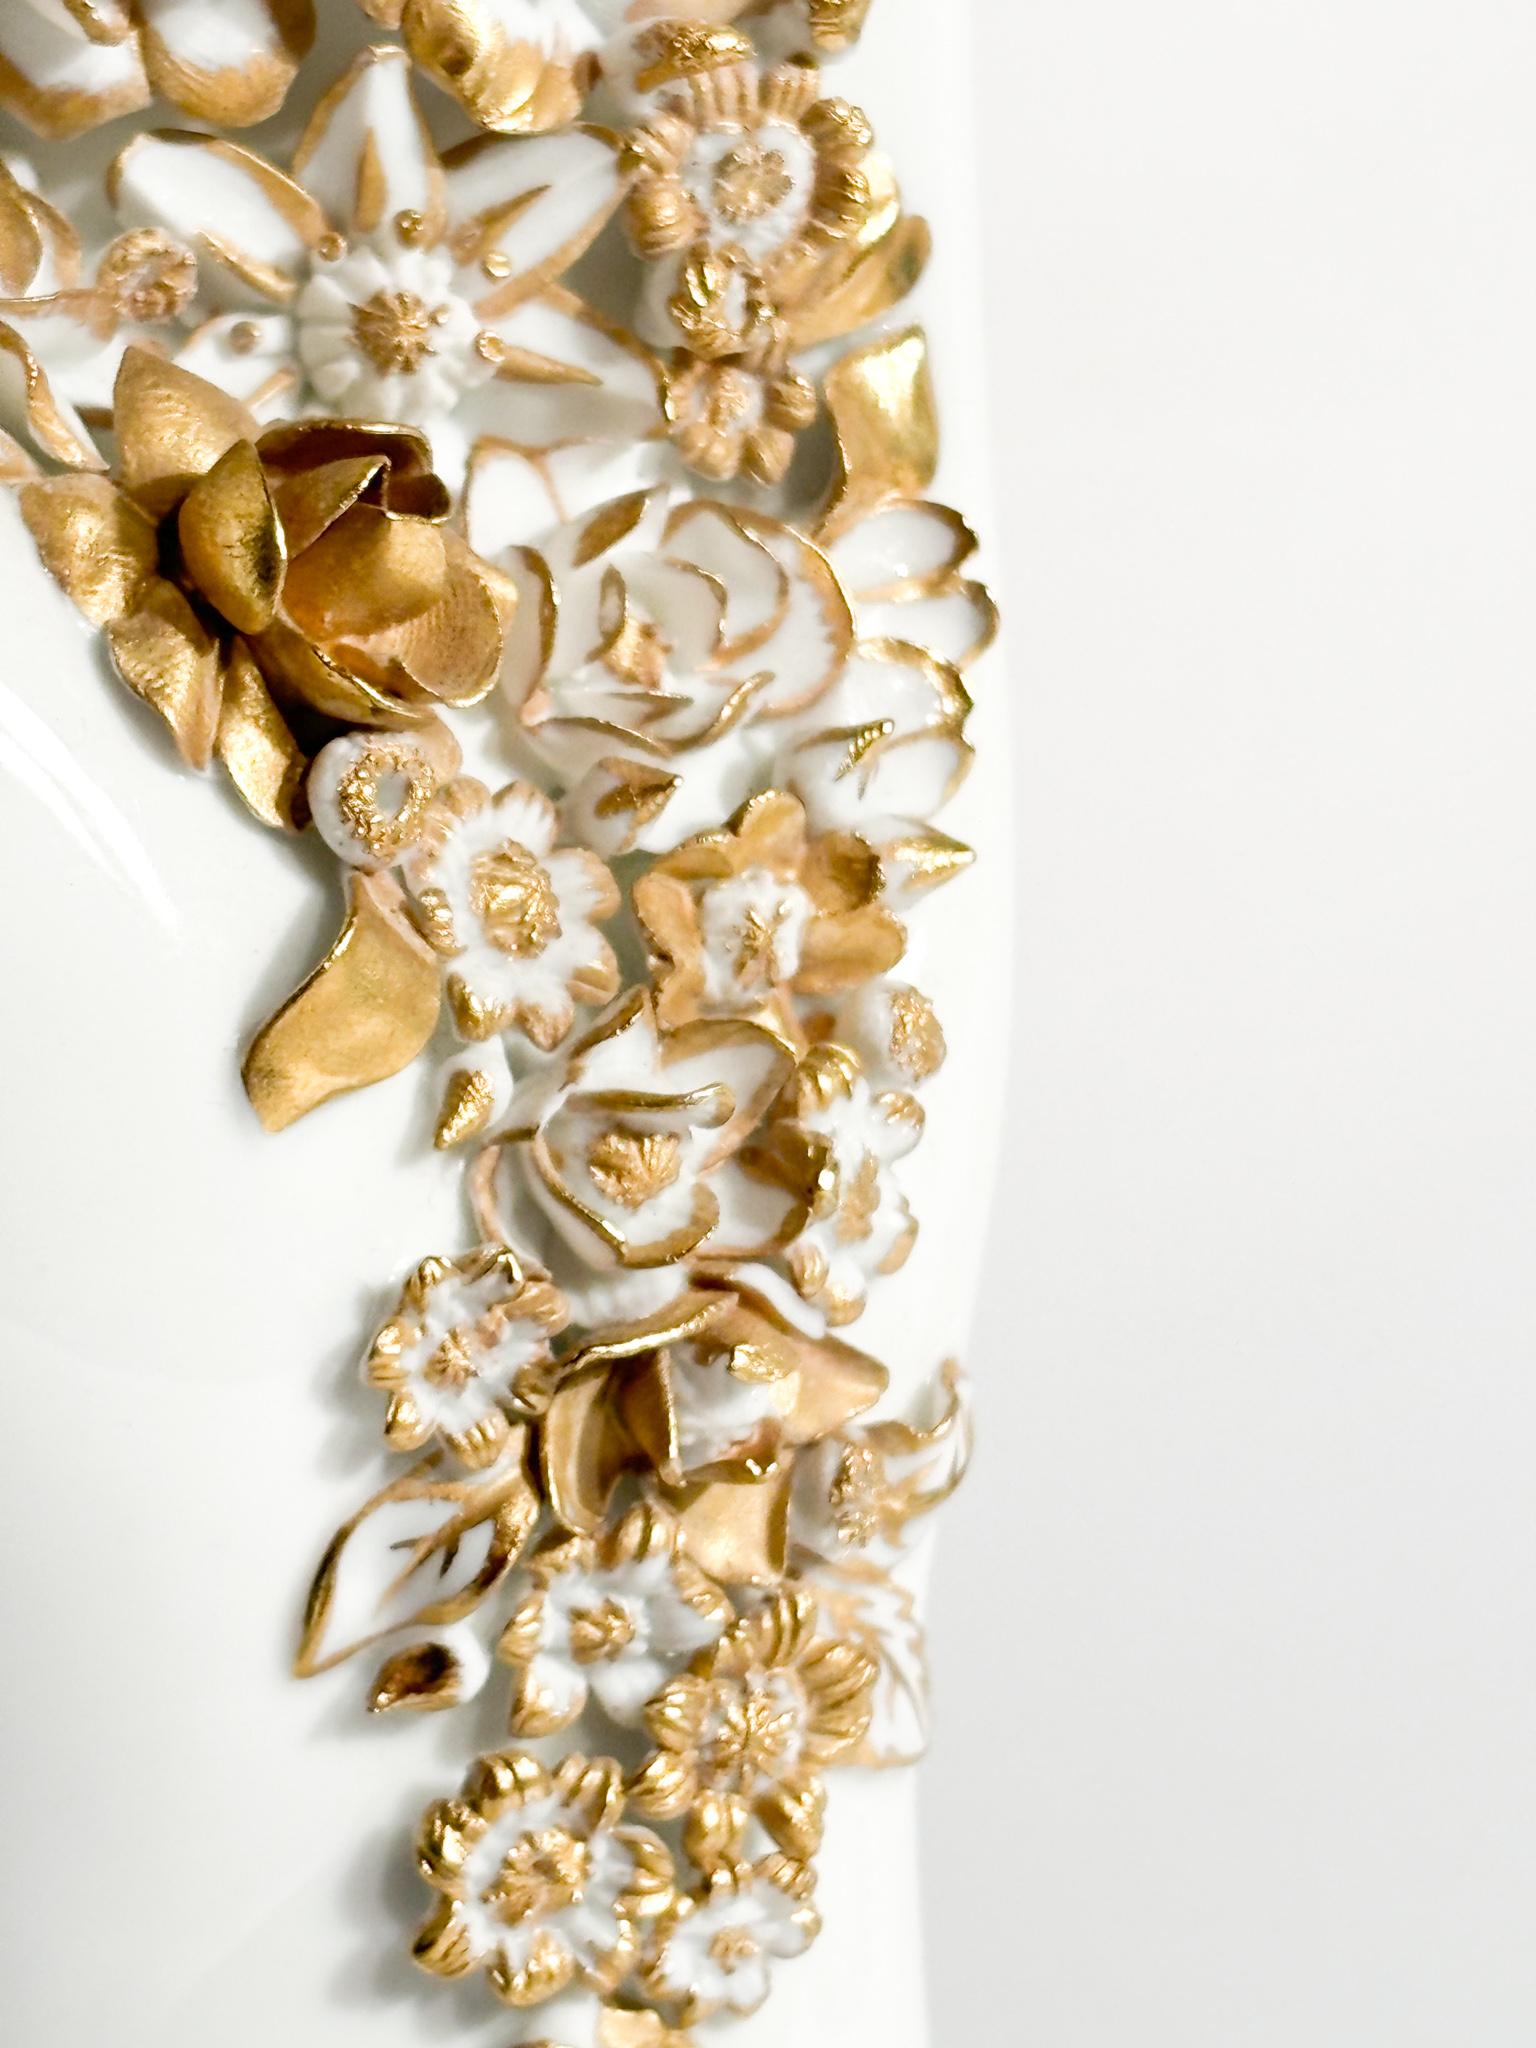 Ponti White and Gold Flowered Hand Art by Gio Ponti for Richard Ginori 1980s For Sale 2